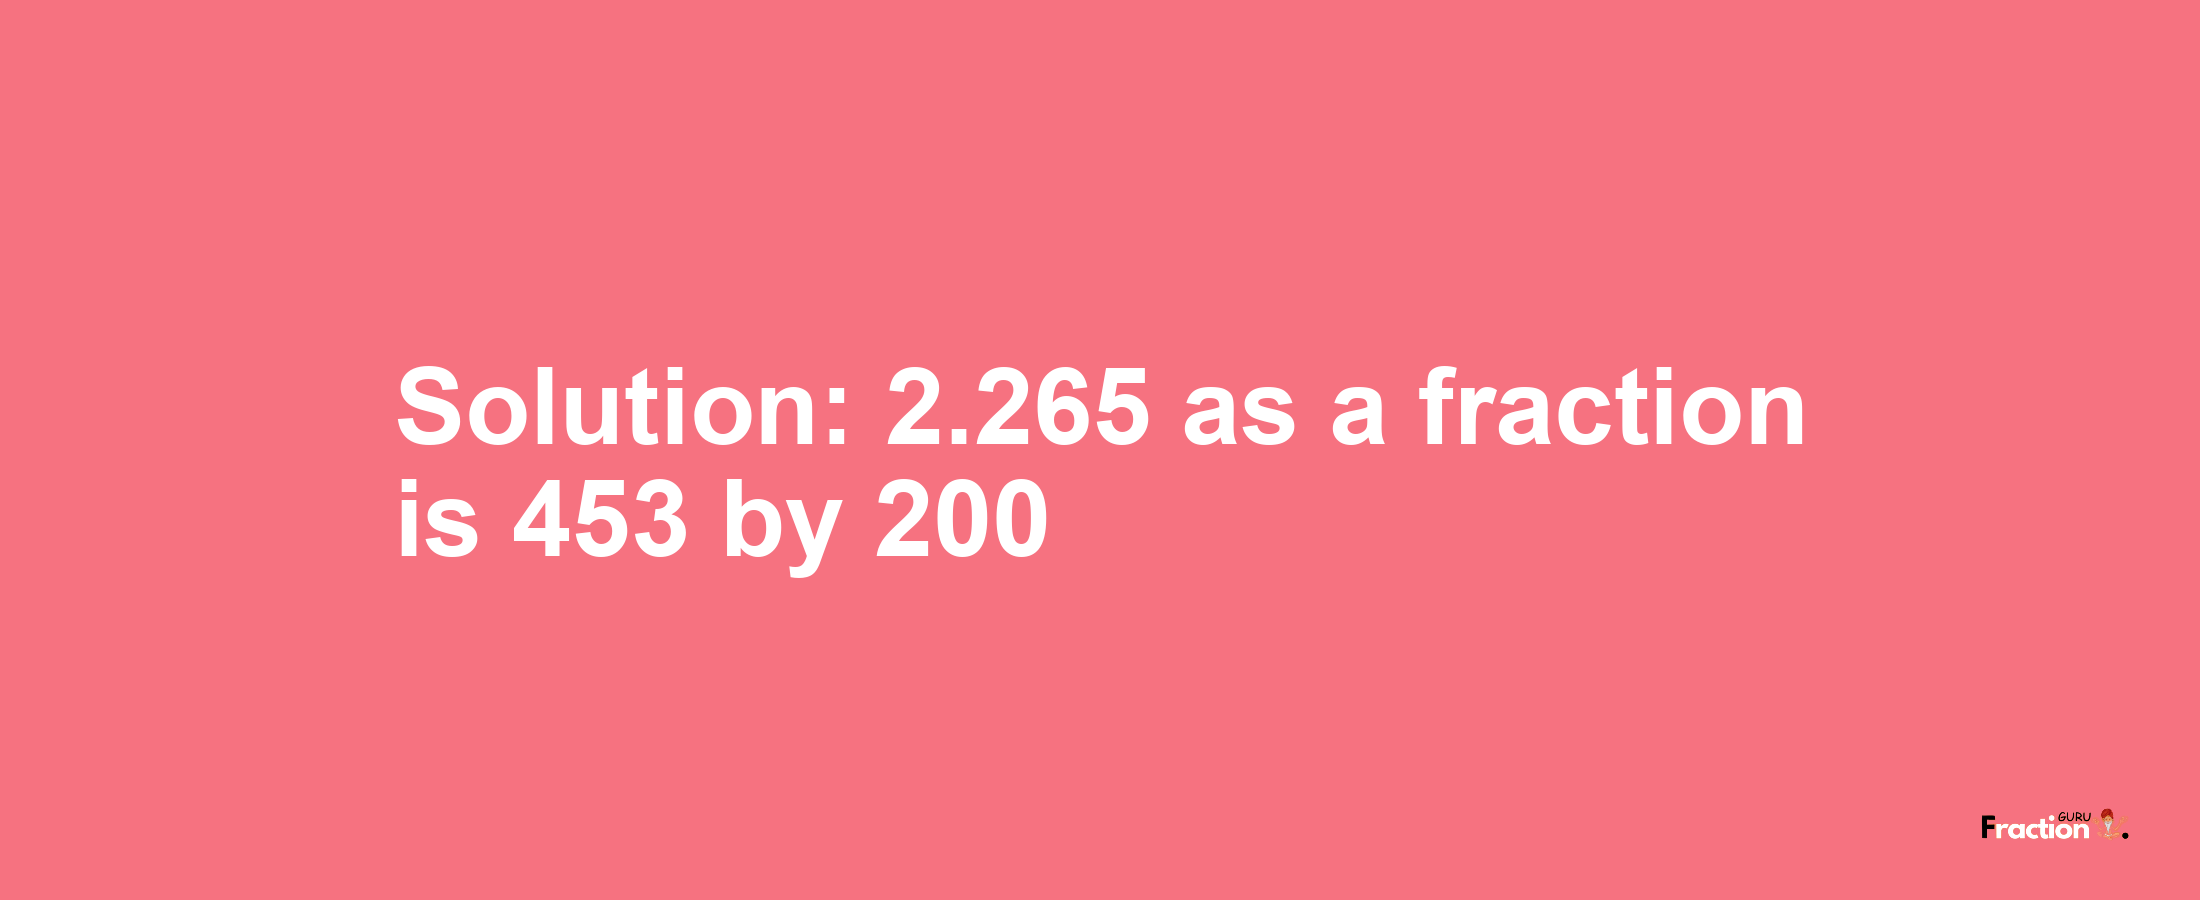 Solution:2.265 as a fraction is 453/200